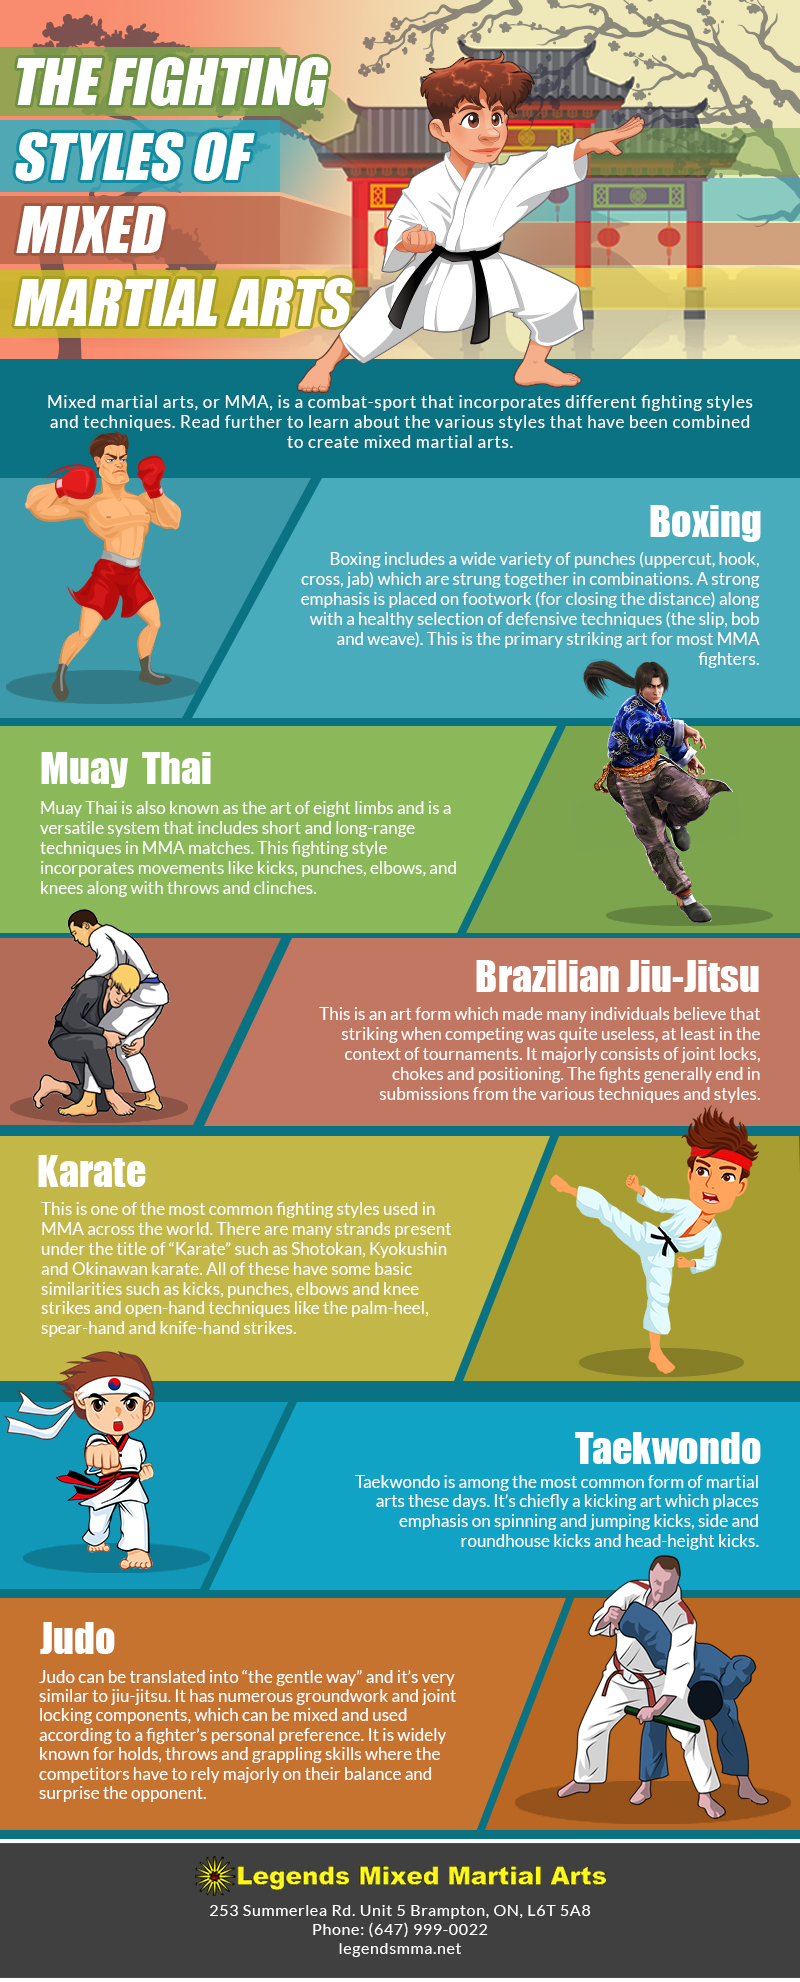 THE FIGHTING STYLES OF MIXED MARTIAL ARTS